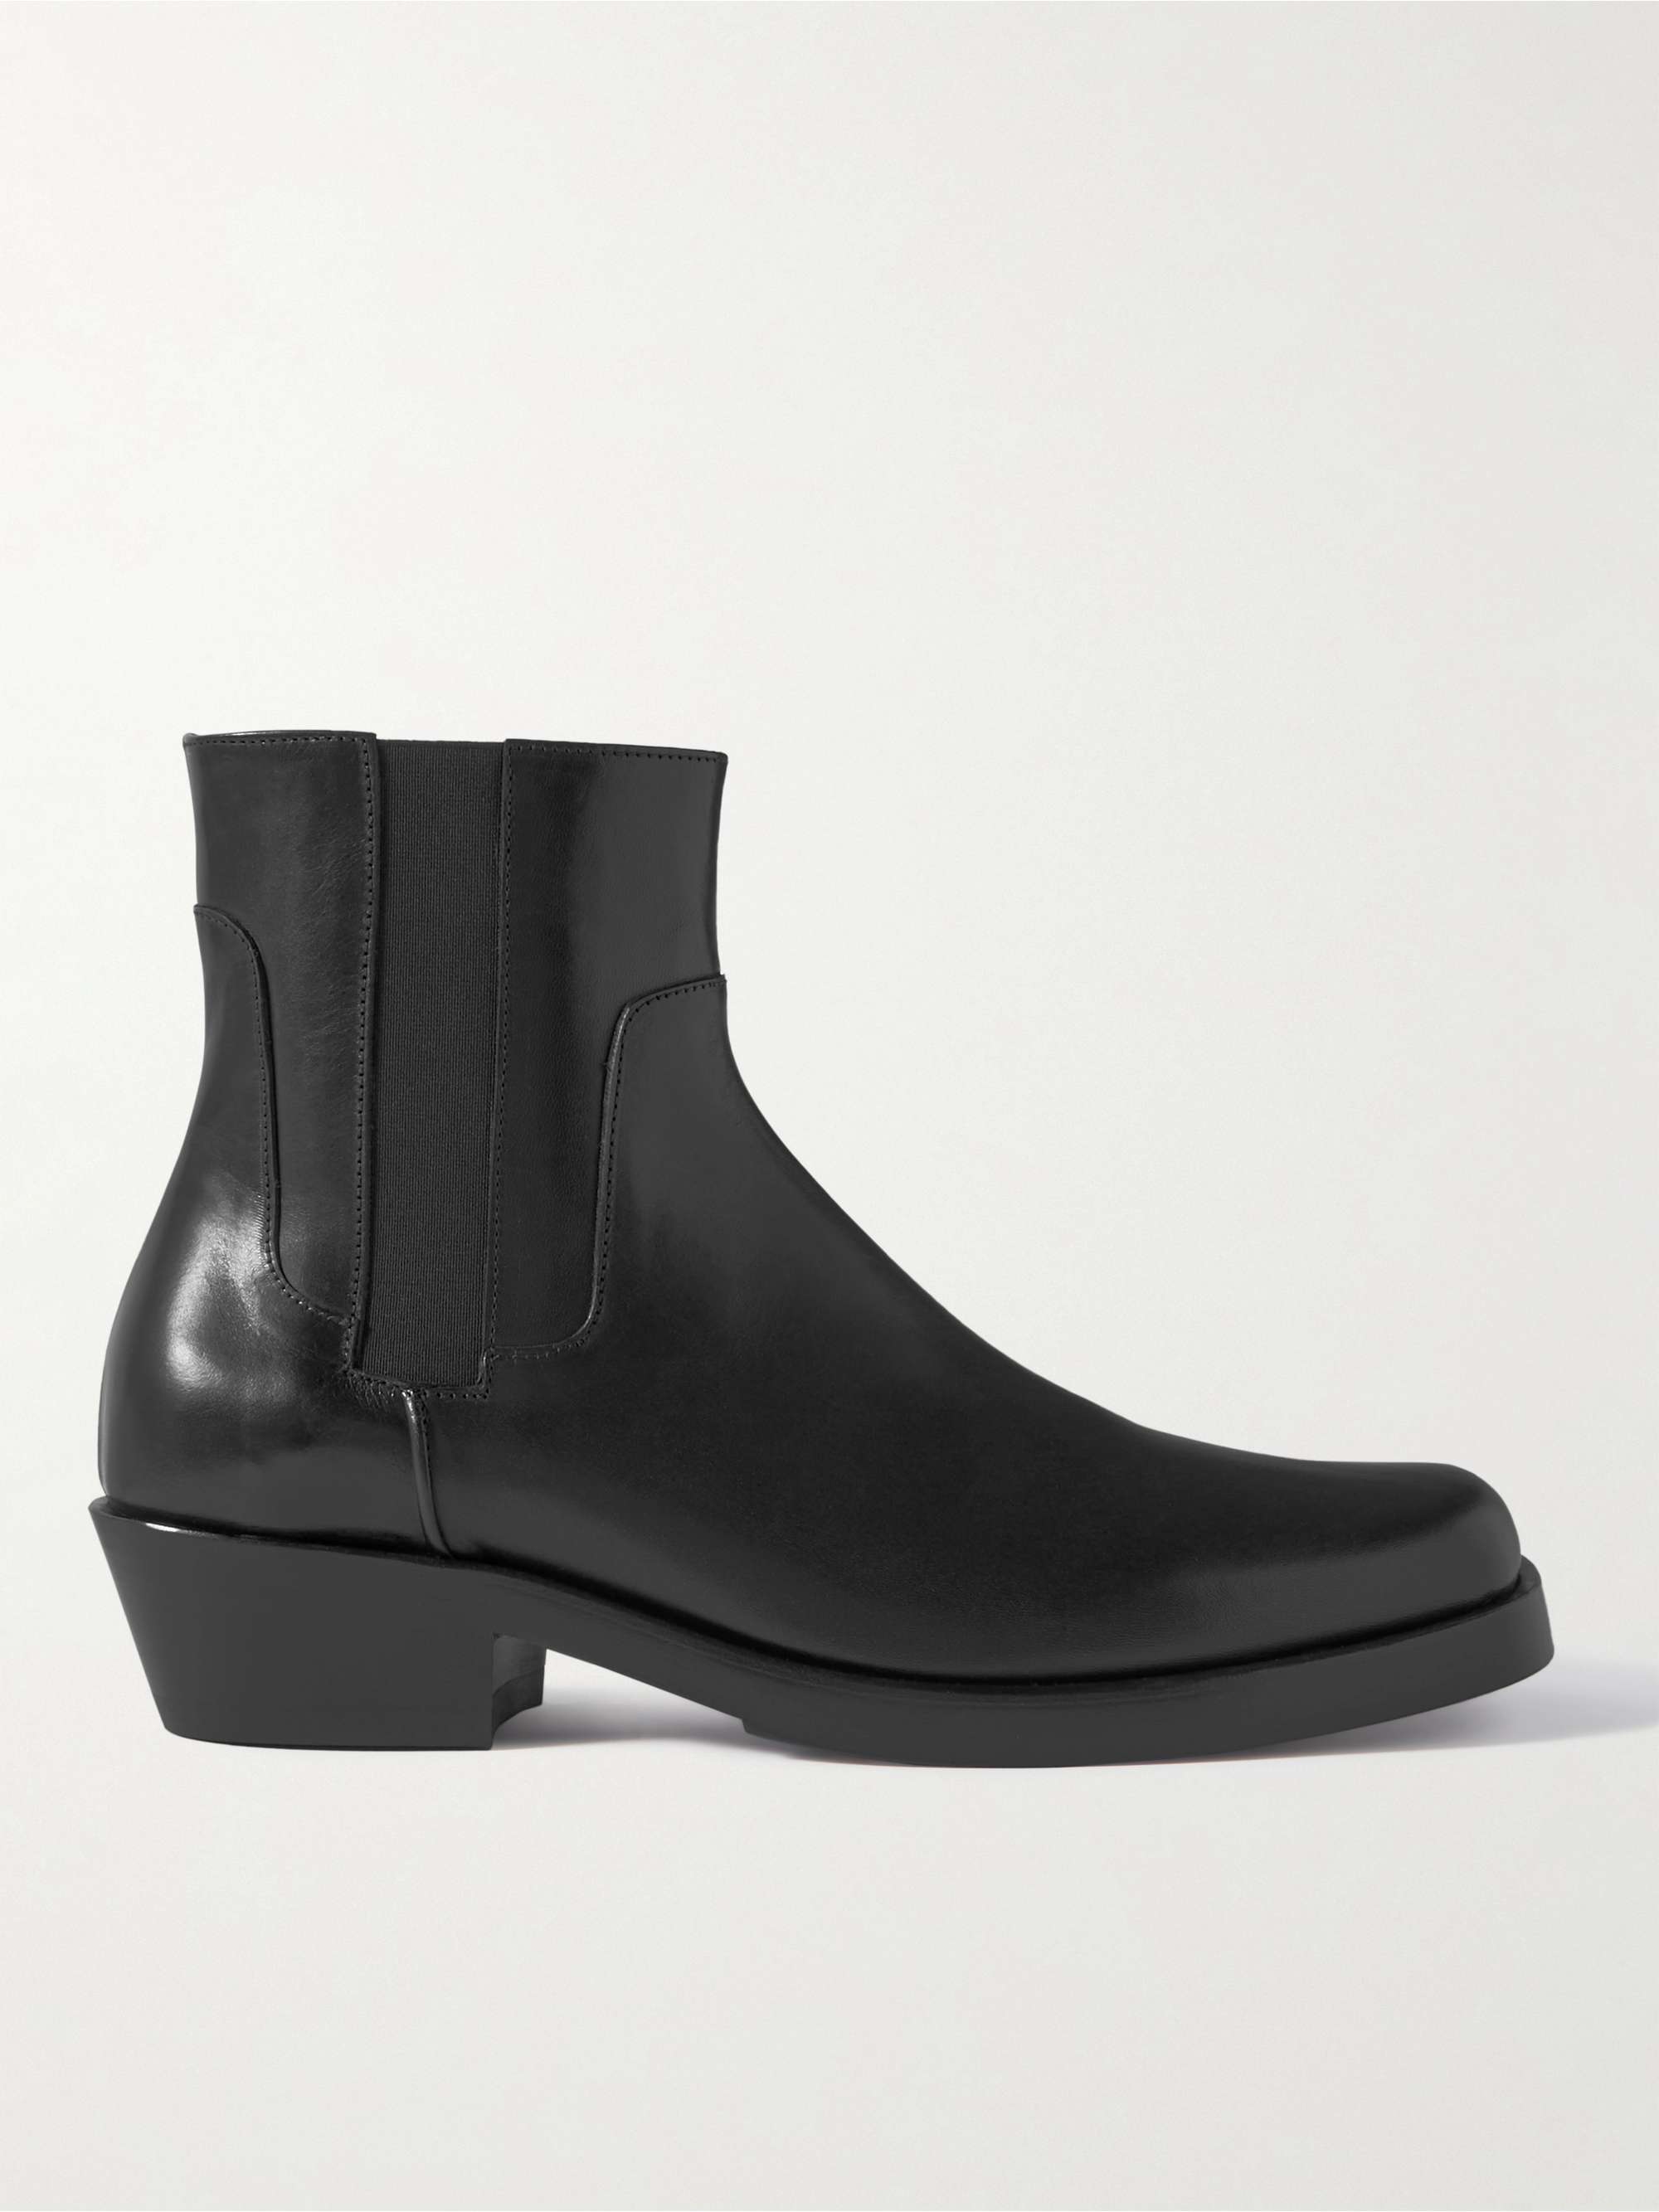 RAF SIMONS Leather Western Boots | MR PORTER